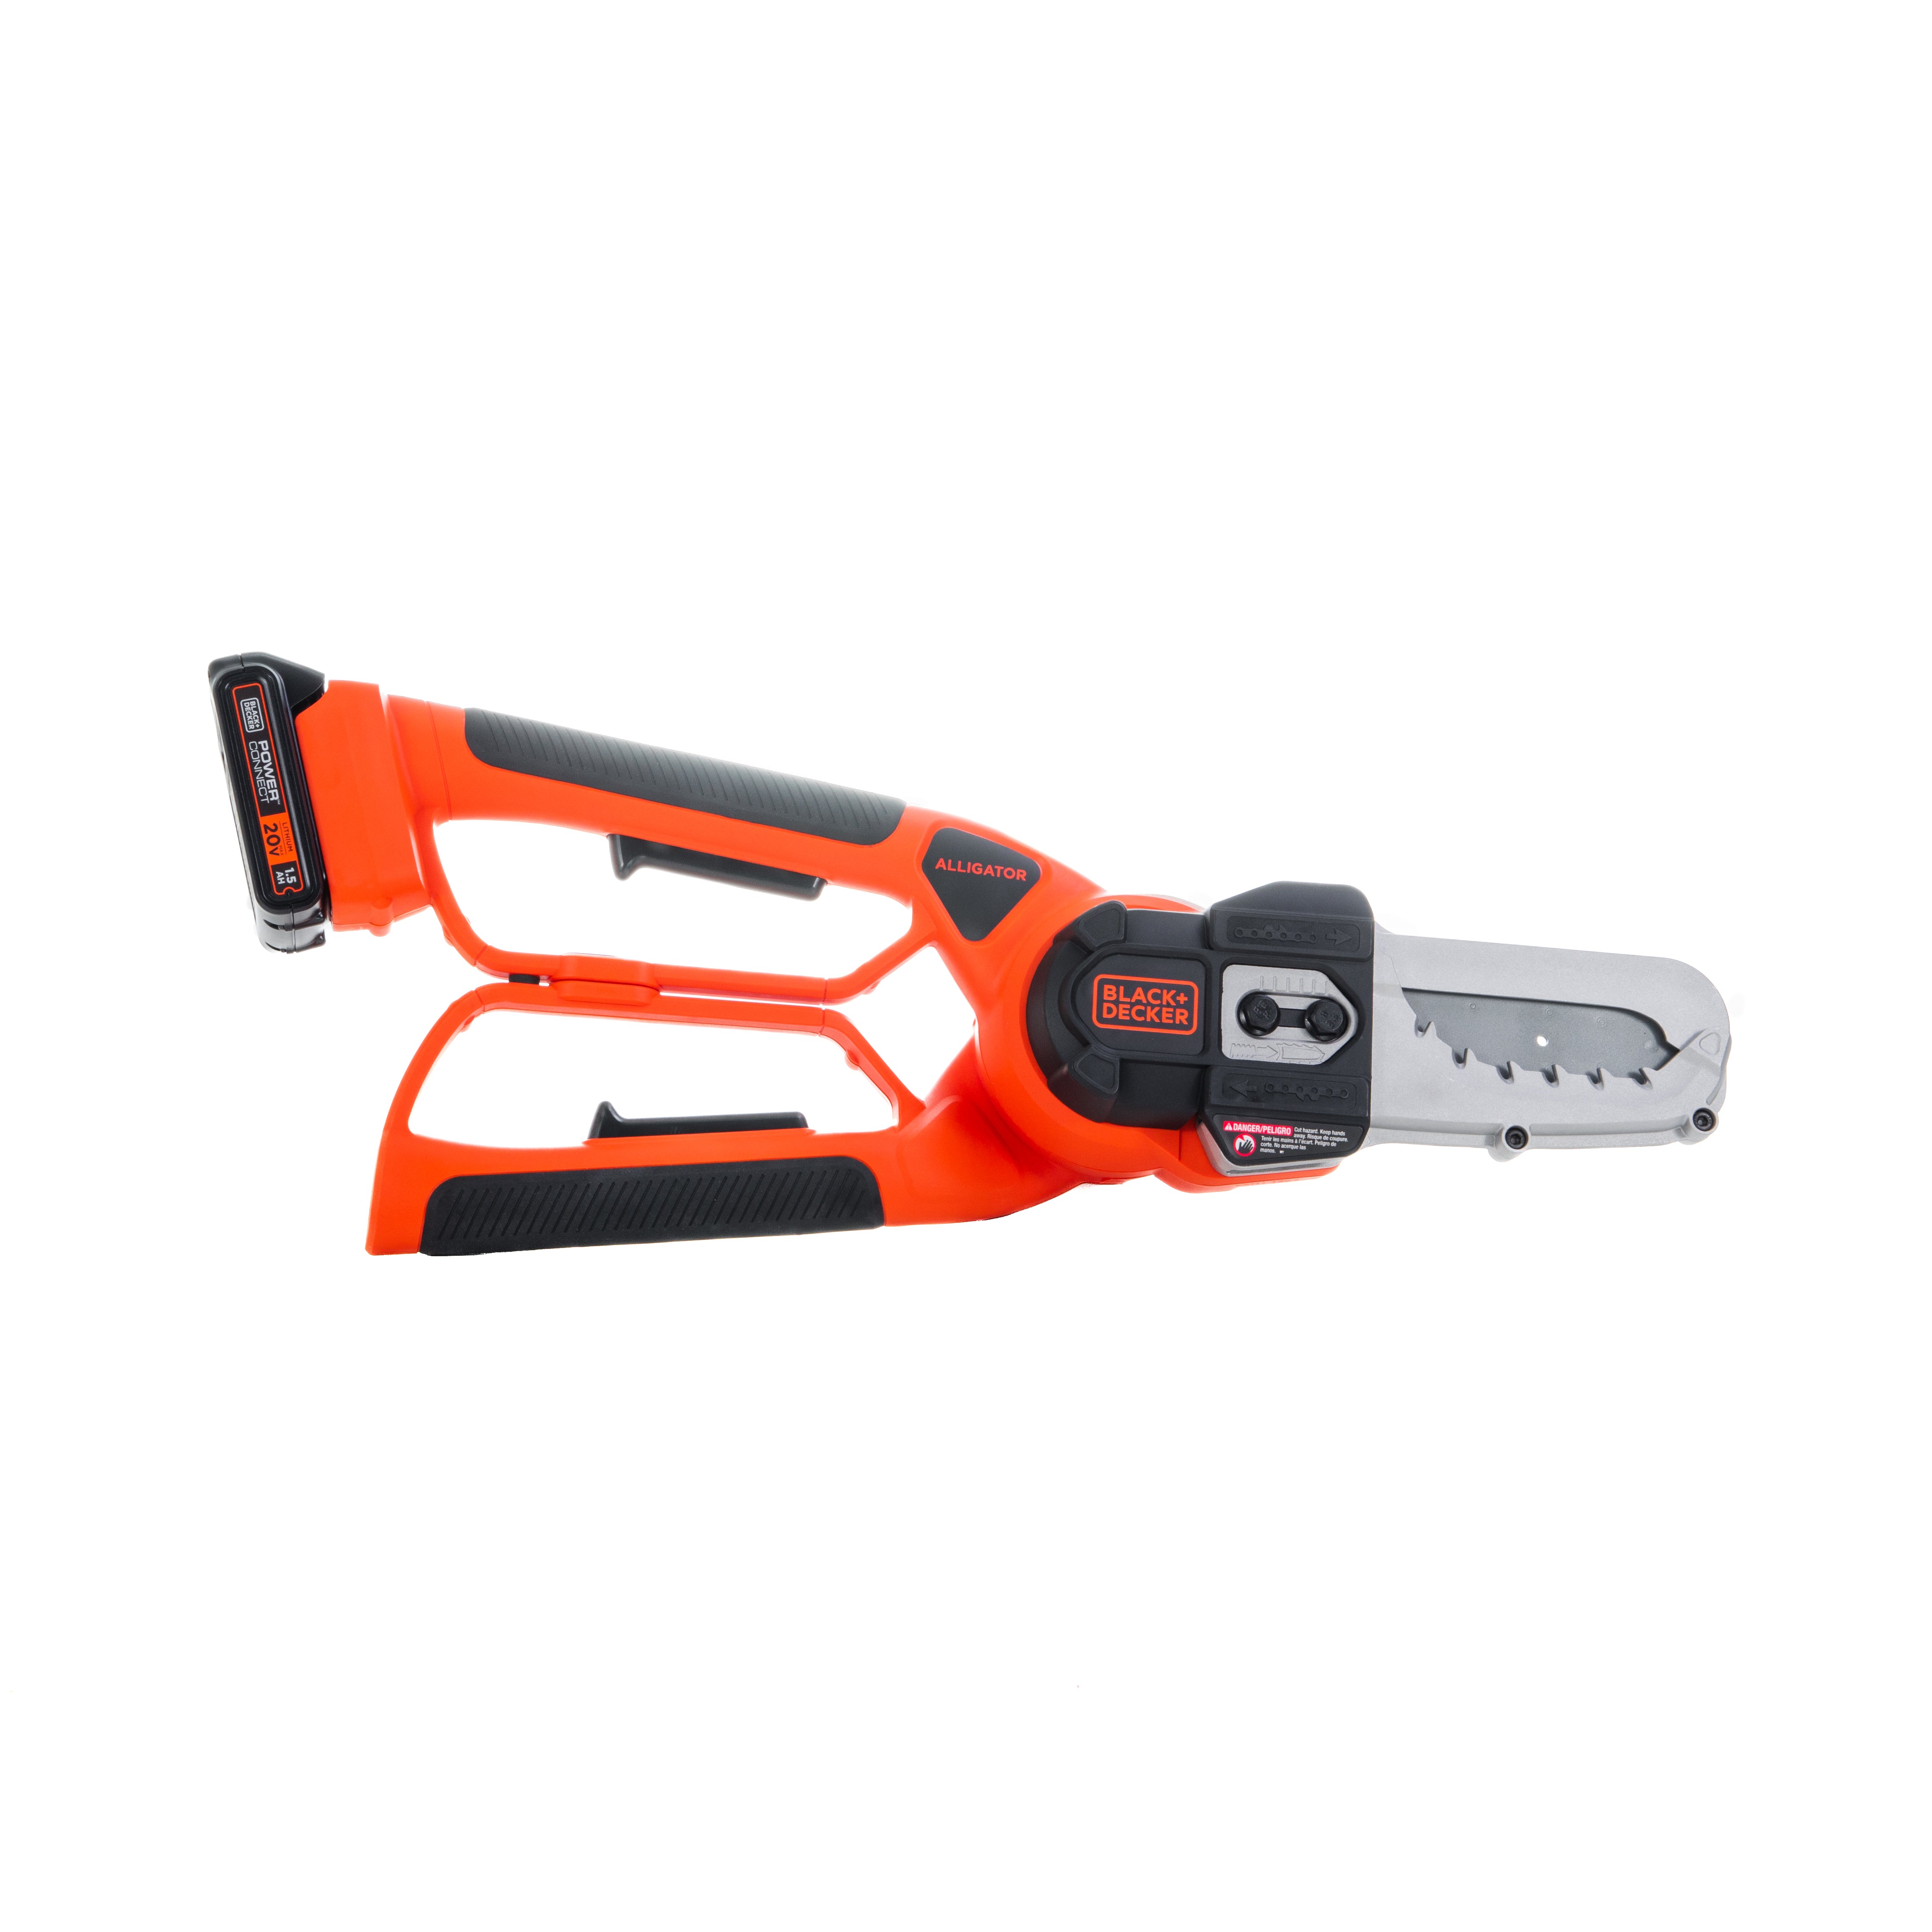 Black & Decker 20V Cordless Alligator Lopper Review  Perfect For Tree  Trimming & Woodcutting! 